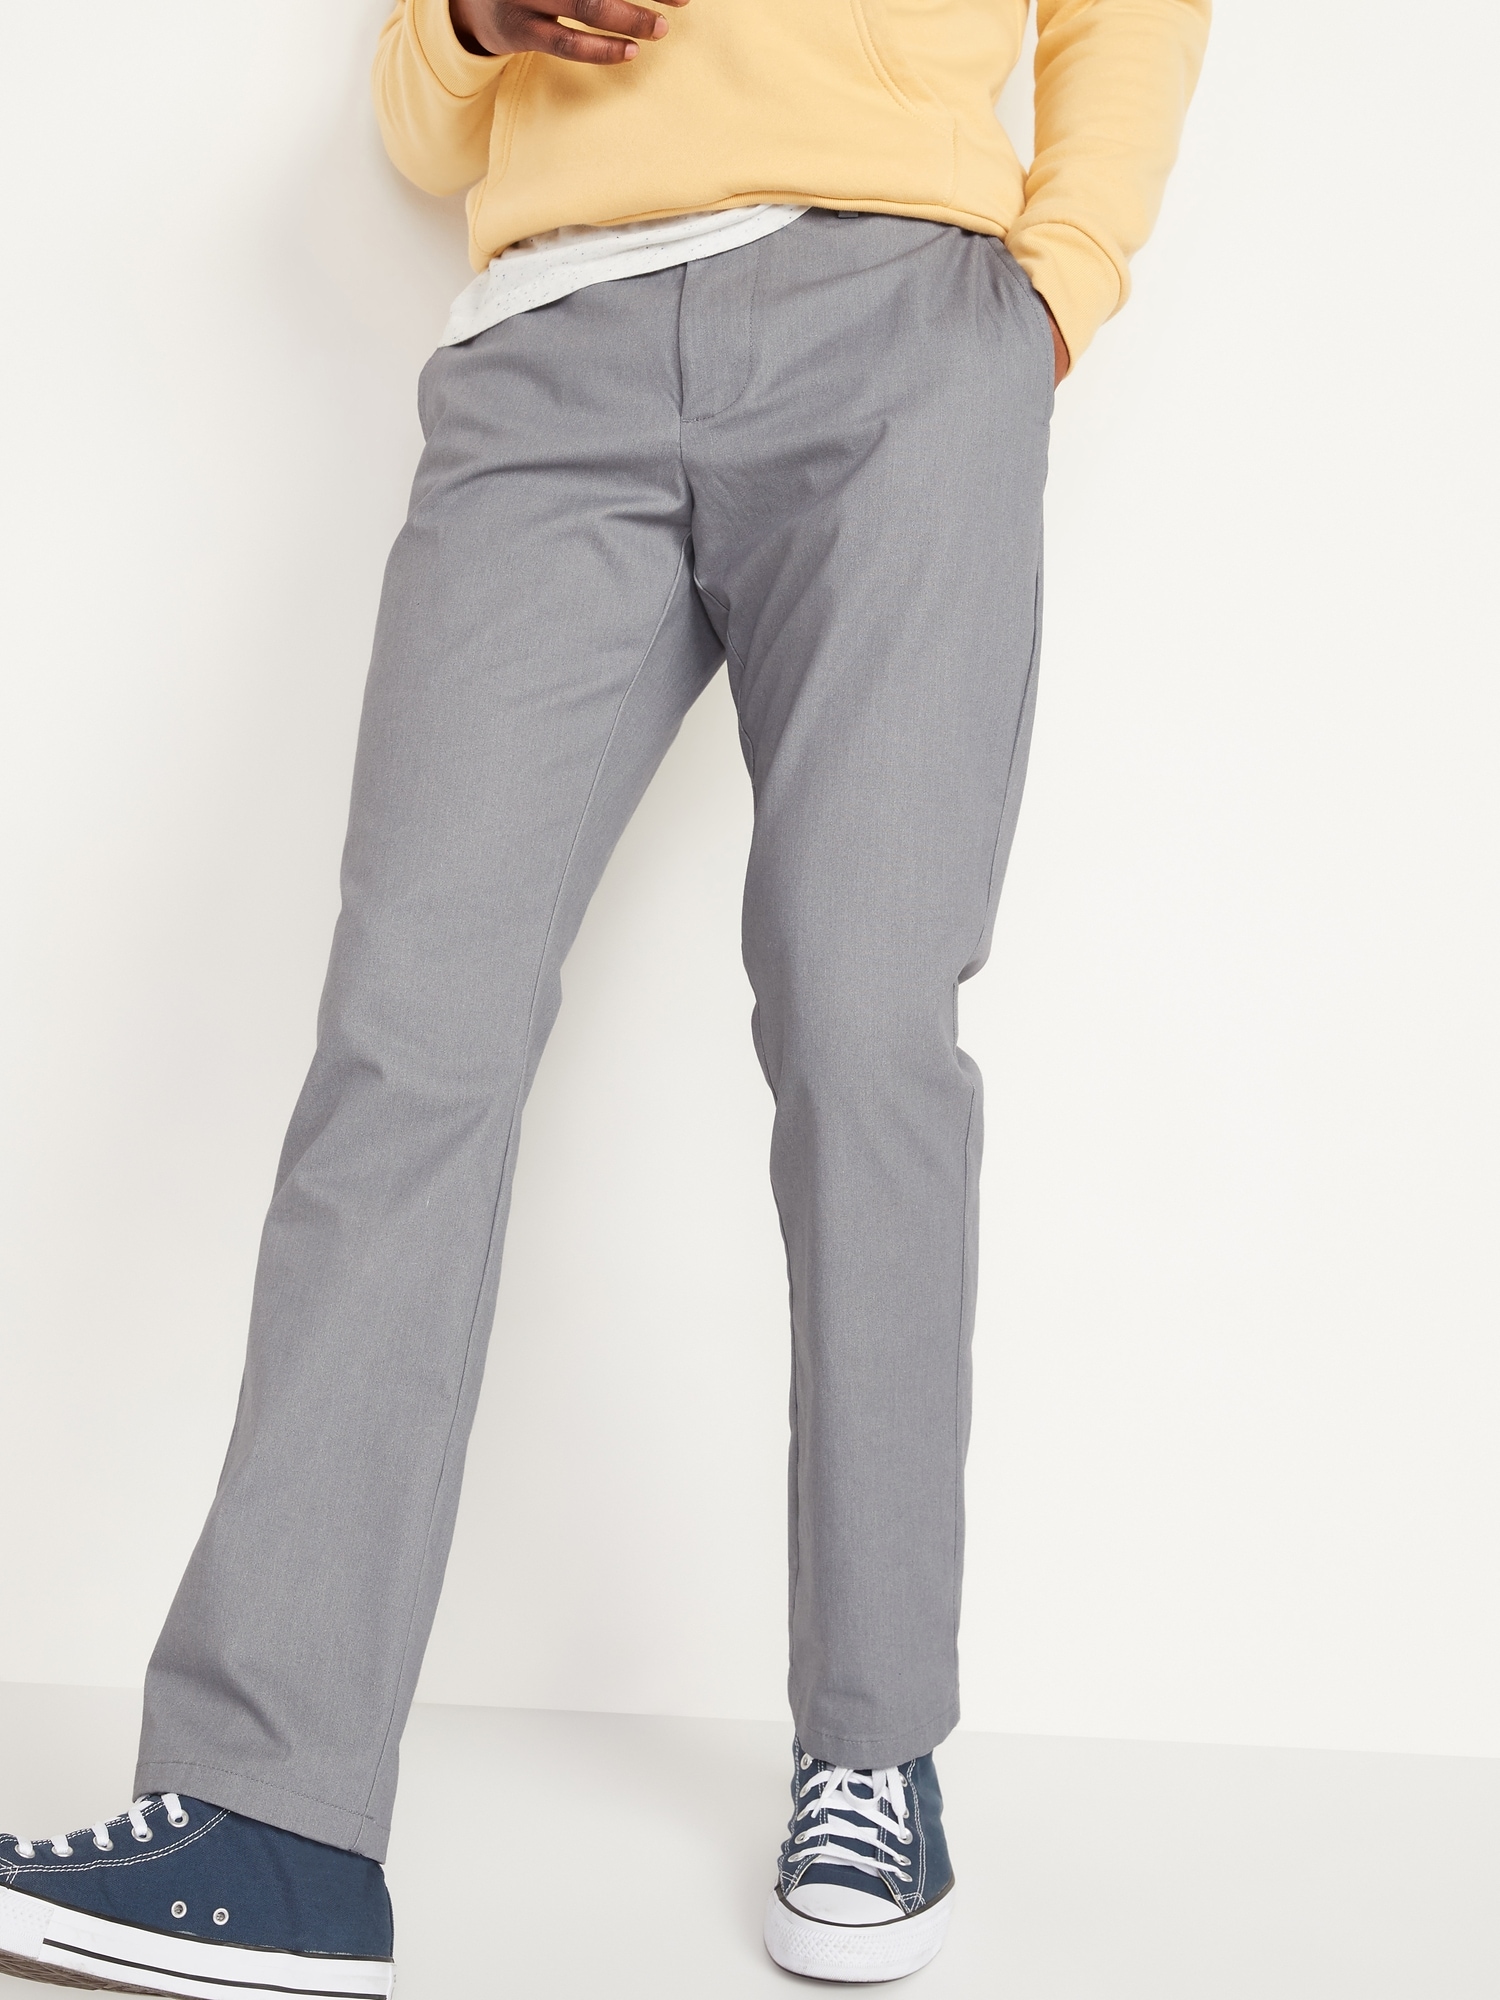 Old Navy - Straight Ultimate Built-In Flex Chino Pants for Men gray